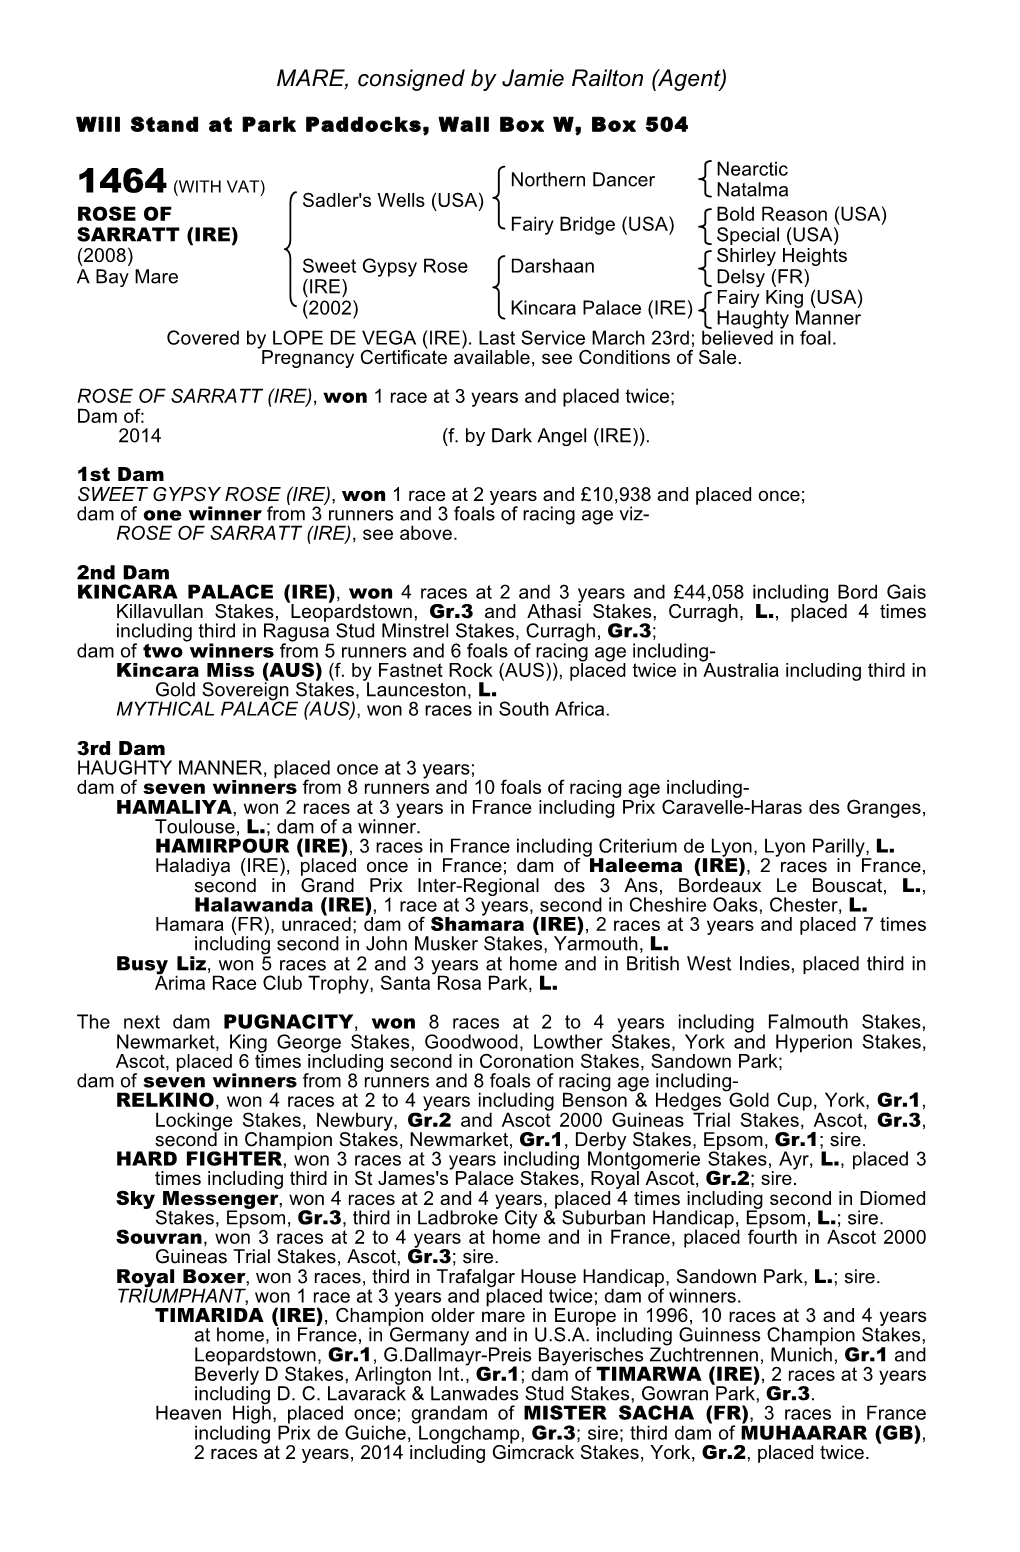 MARE, Consigned by Jamie Railton (Agent)